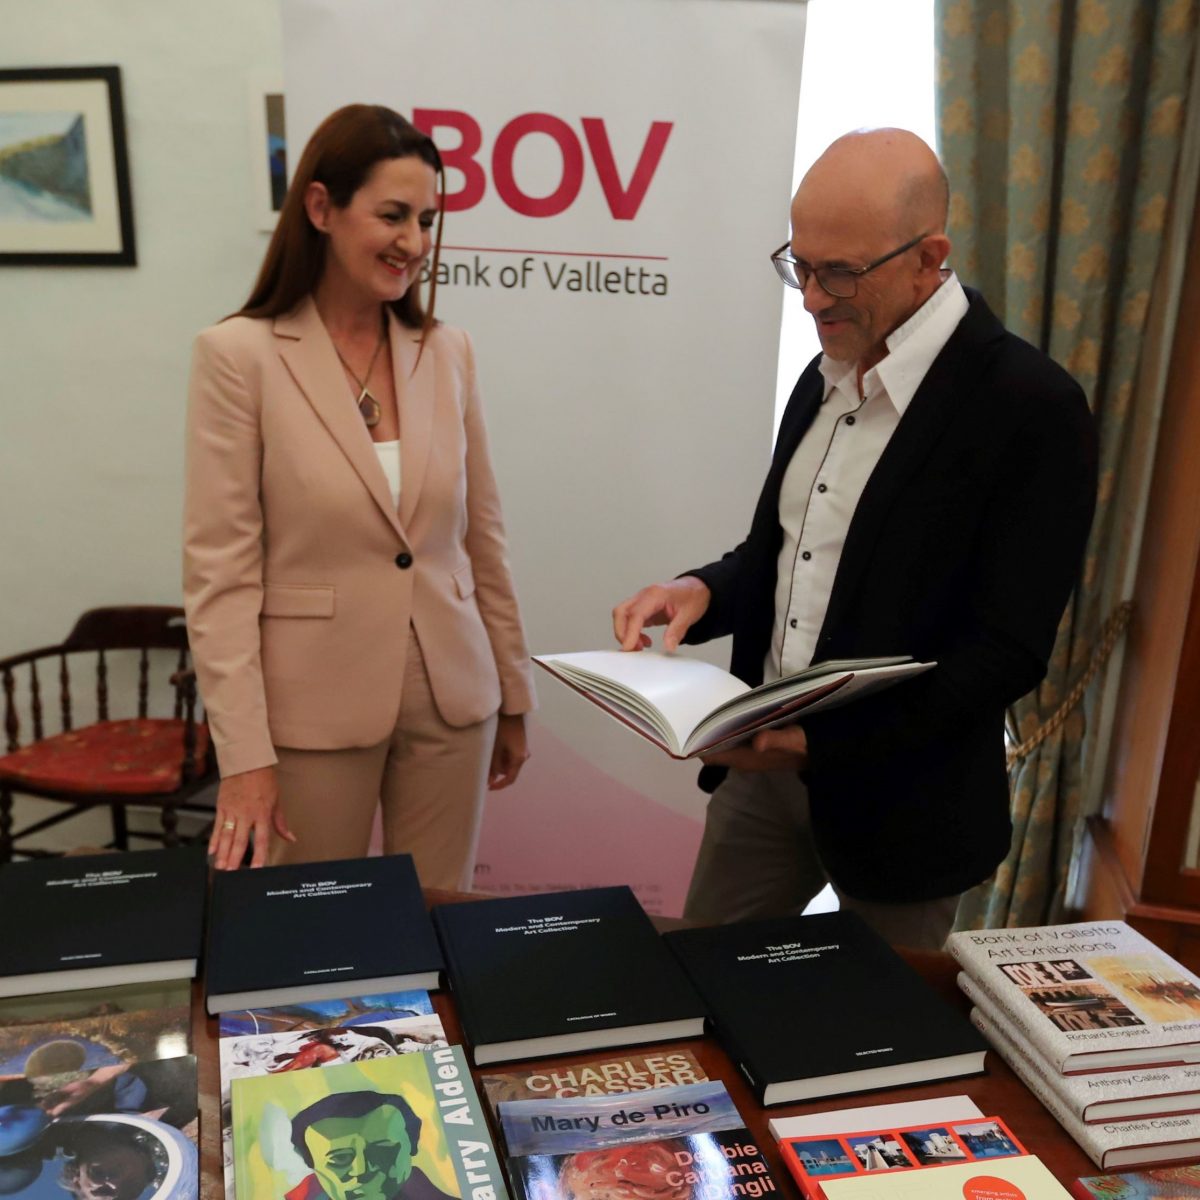 BOV extends a hand to the Malta Society of Arts